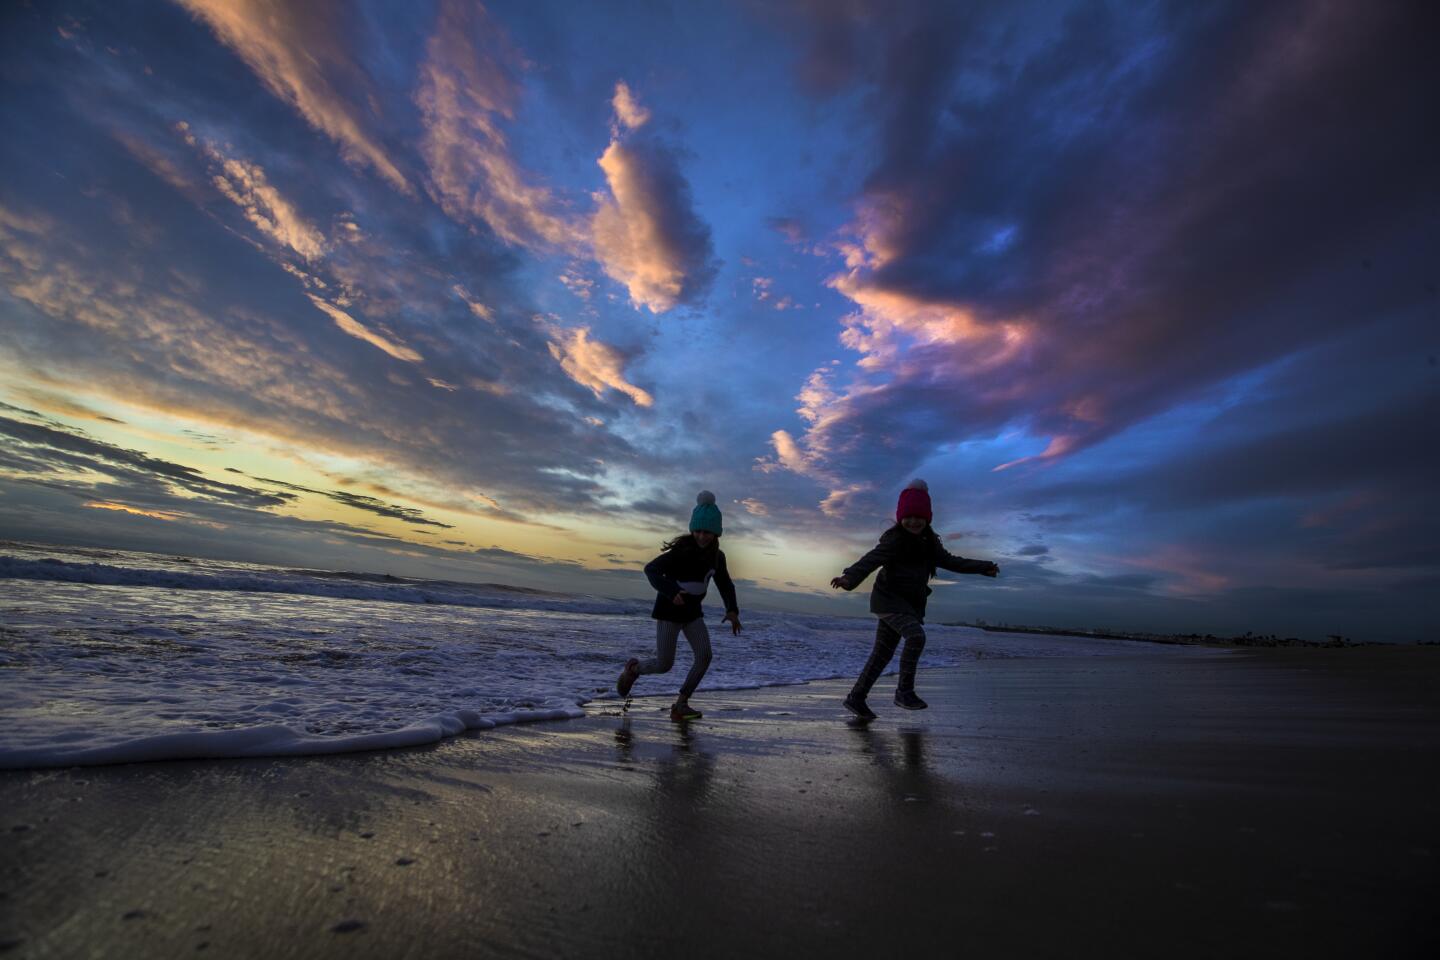 Chi Chi Hakimi, 9, left, and Darya Hakimi, 8, are silhouetted by the sky at dusk as they run from the waves in between rain showers in Newport Beach, Calif., on Nov. 20, 2019.